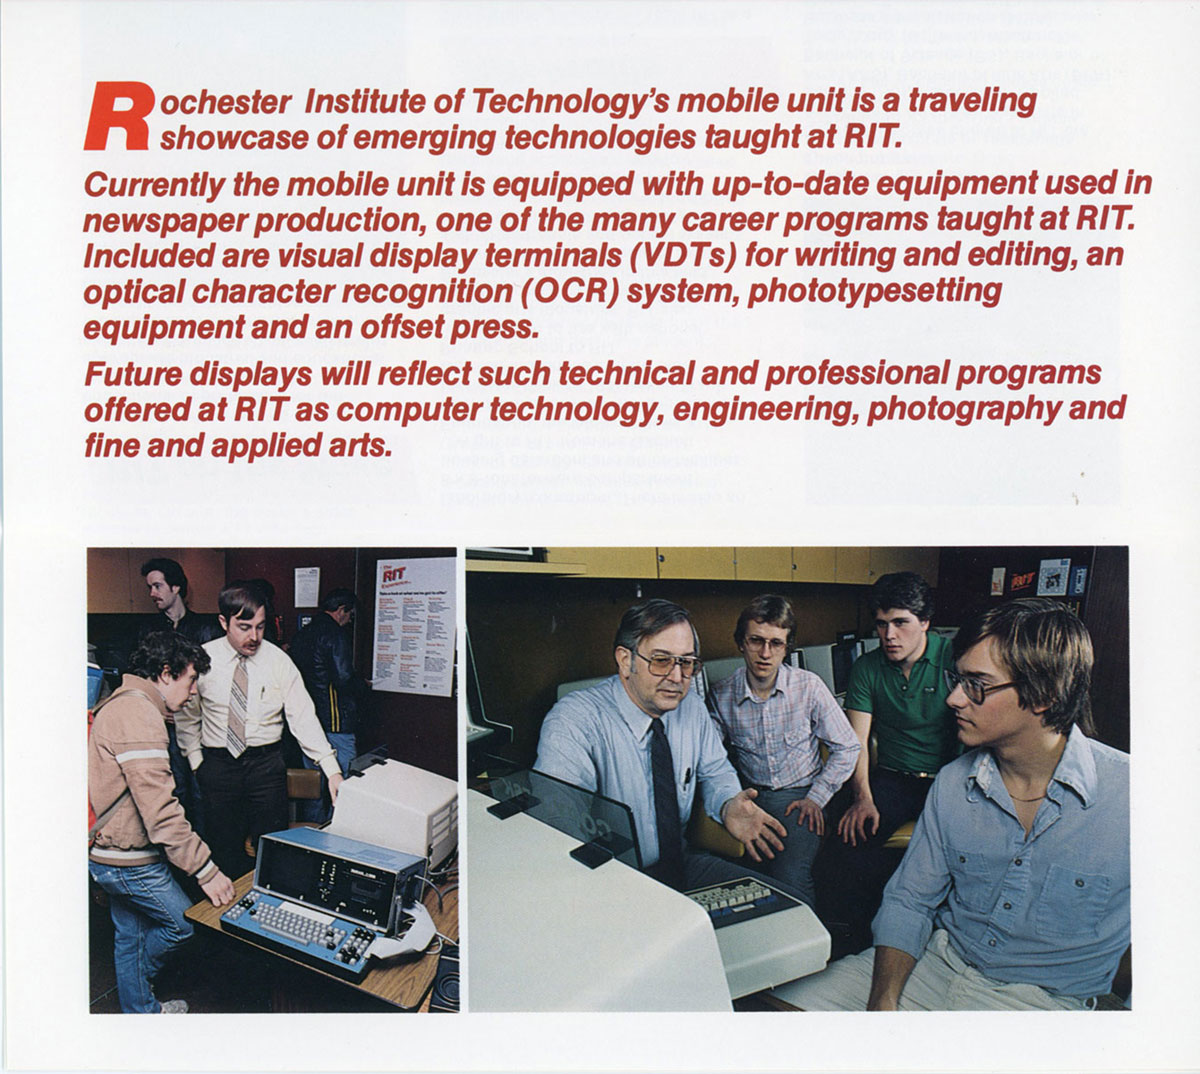 Rochester Institute of Technology's Mobile unit is a traveling showcase of emerging technologies taught at RIT. Currently the mobile unit is equipped with up-to-date equipment used in newspaper production, one of the many career programs taught at RIT. Included are visual display terminals (VDTs) for writing and editing, an optical character recognition (OCR) system, phototypesetting equipment and an offset press.